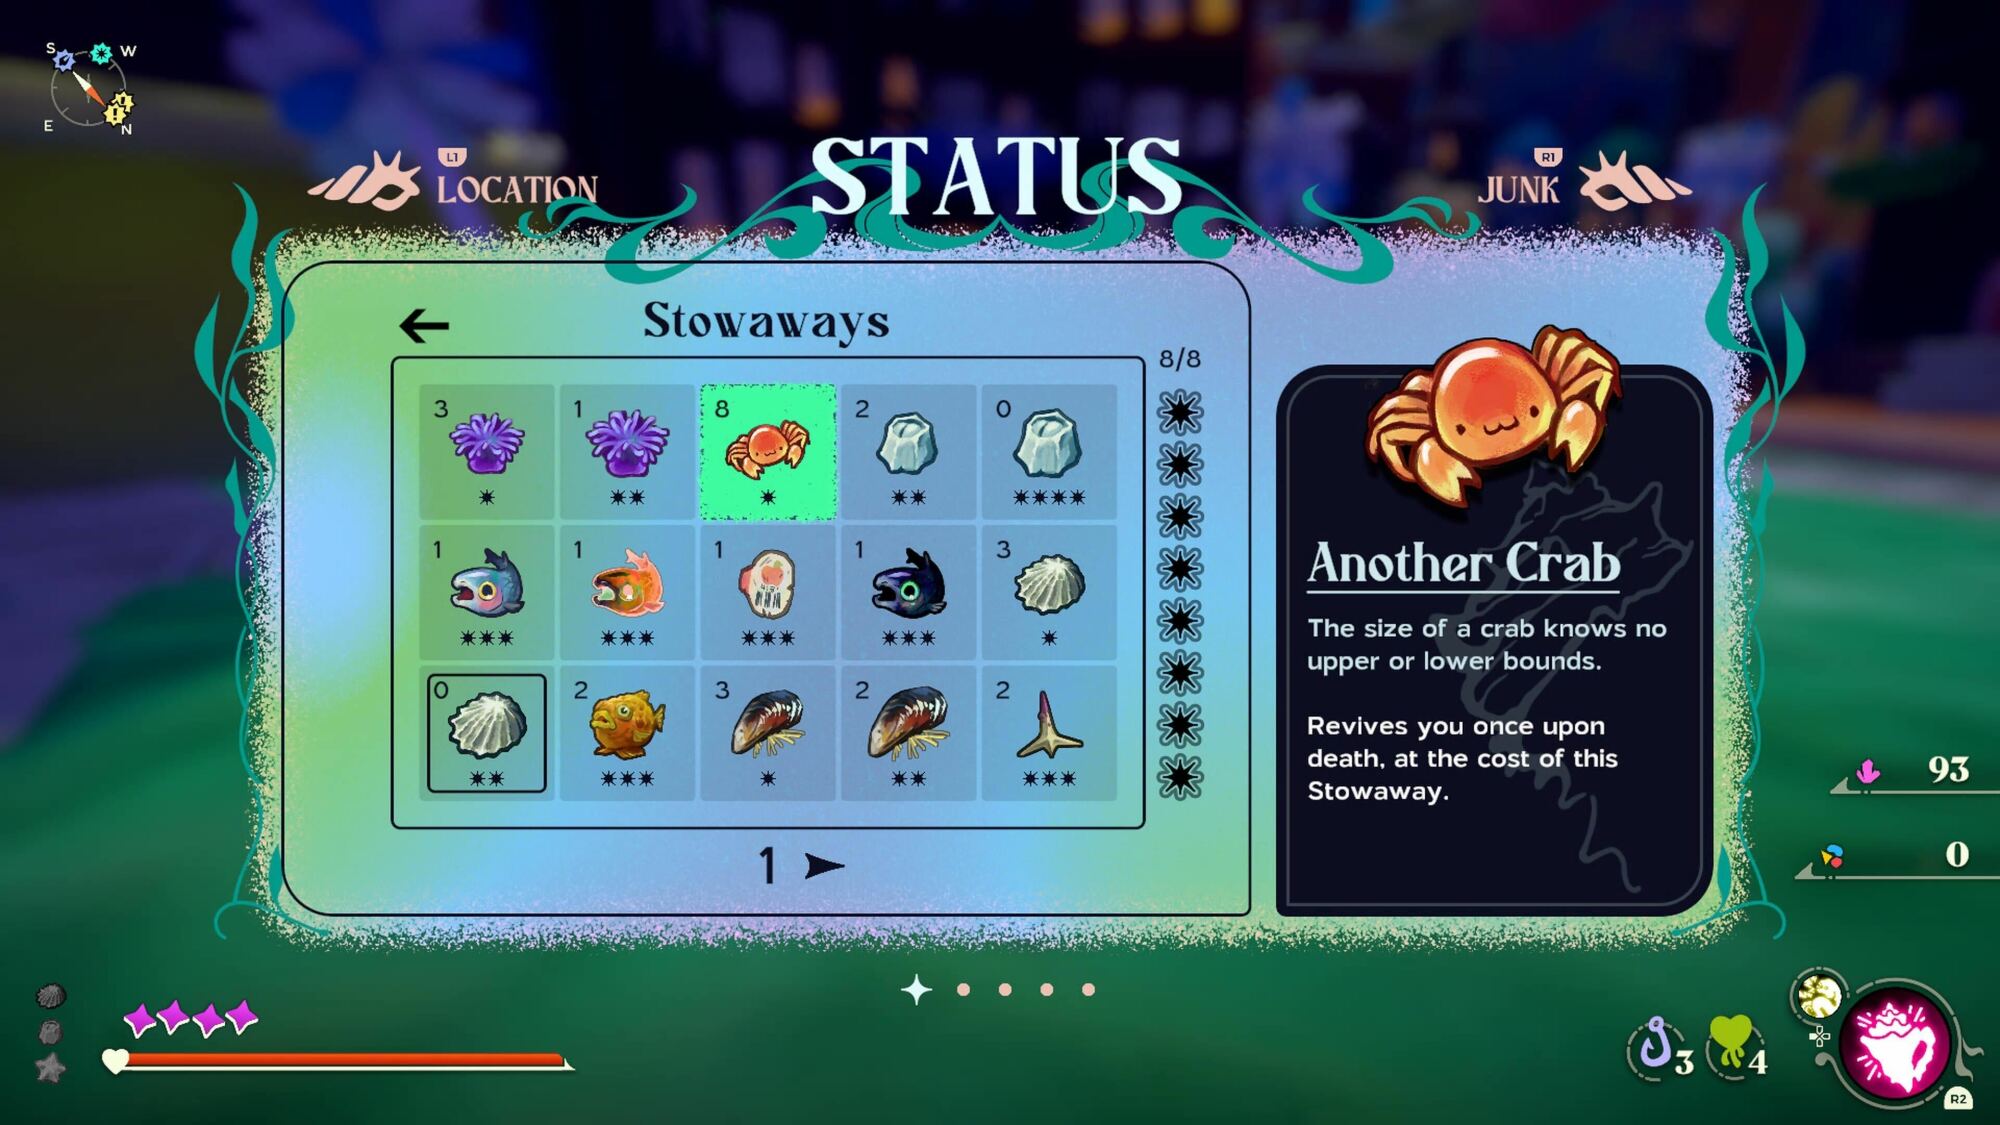 A game interface displaying a 'Status' screen with 'Stowaways' inventory, featuring illustrated items like fish, shells, and a special item called 'Another Crab.'